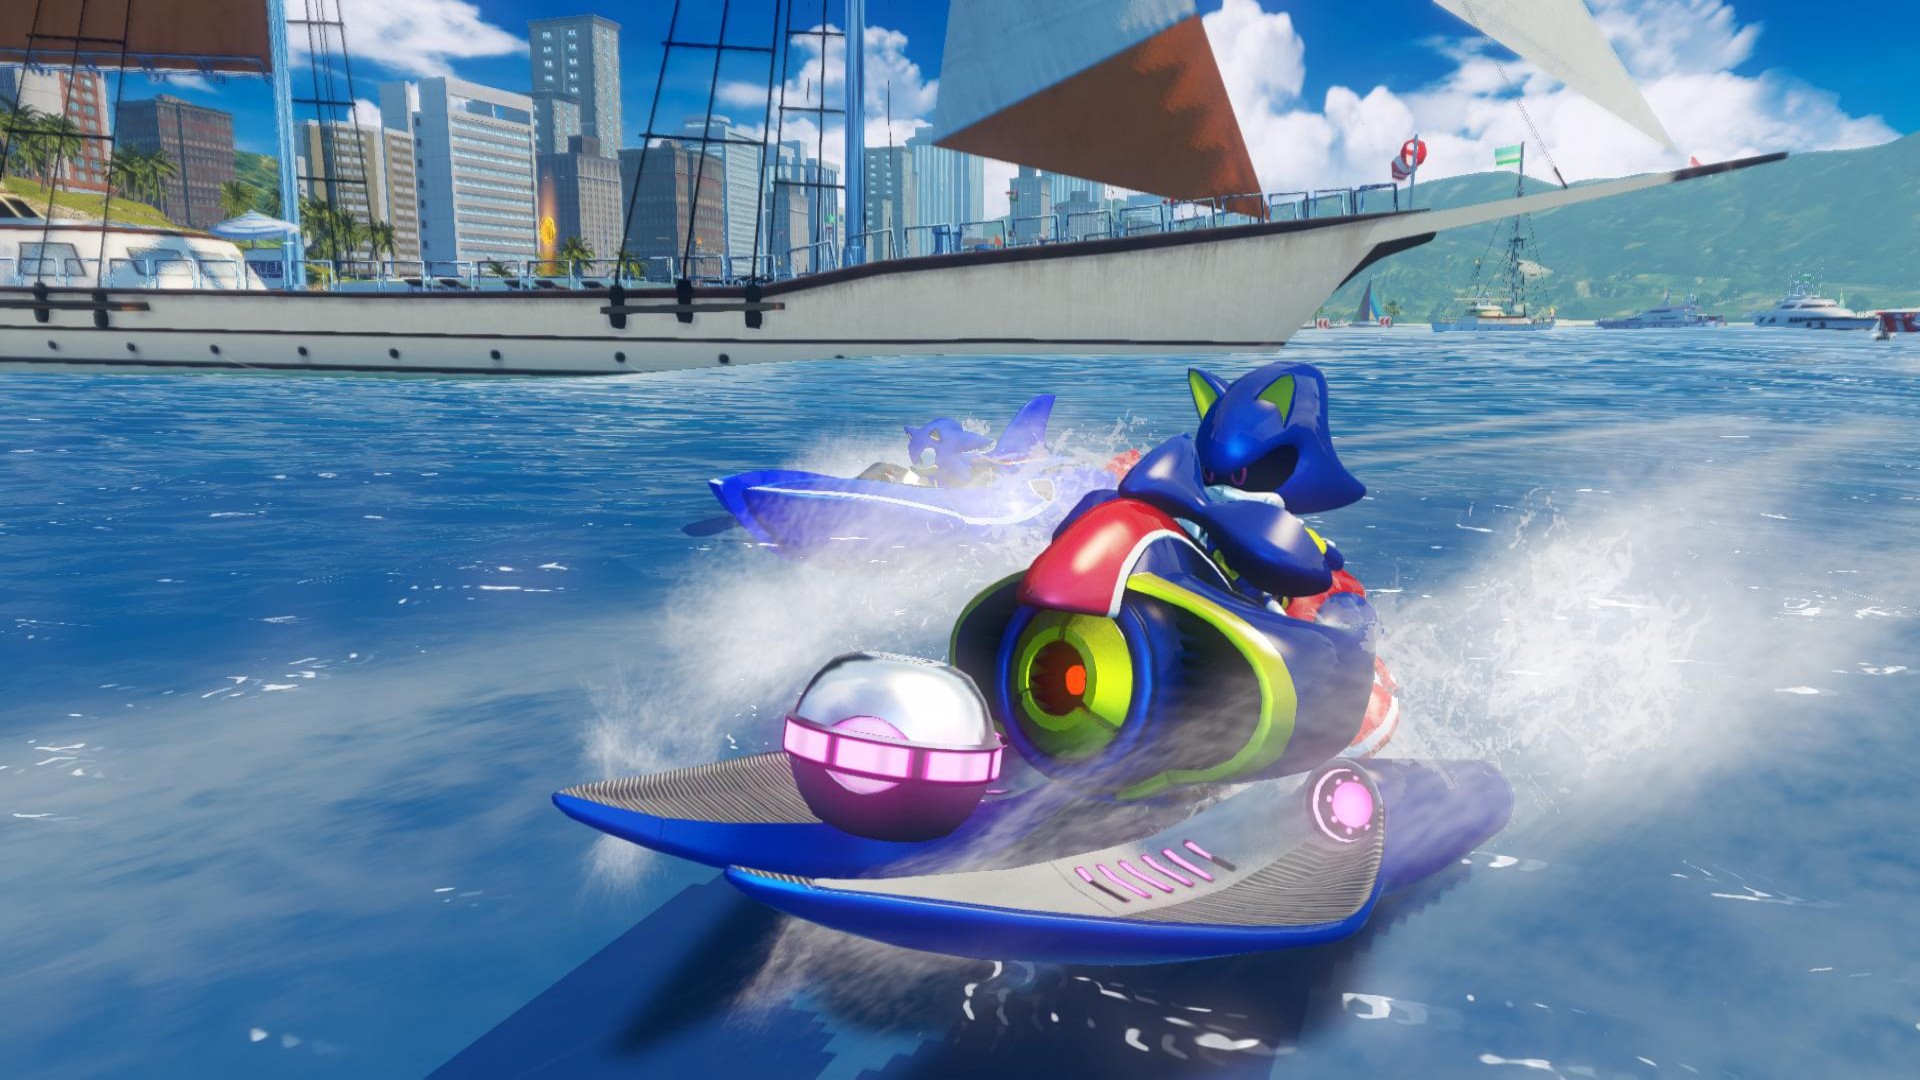 There are far more images available for Sonic & All-Stars Racing Transf...